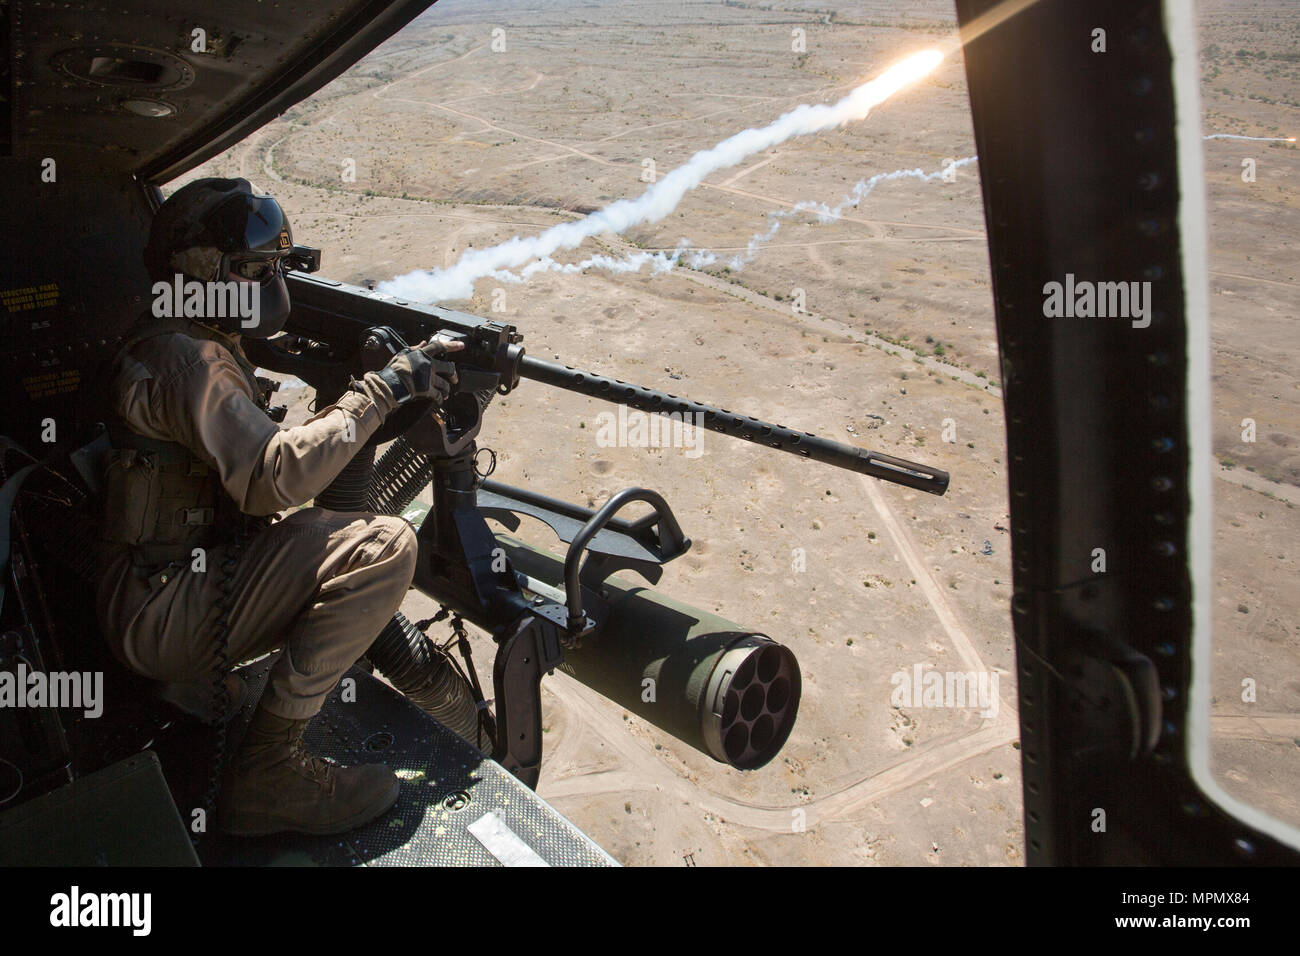 U.S. Marine Corps Cpl. Justin Gilstrap, a crew chief with Marine Light Attack Helicopter Squadron 167 (HMLA-167), fires a GAU-21 .50-caliber machine gun during aerial gunnery refinement drills at Chocolate Mountain Aerial Gunnery Range, California, April 5, 2017. Weapons and Tactics Instructor 2-17 is a seven-week training event hosted by Marine Aviation Weapons and Tactics Squadron One (MAWTS-1) cadre. (U.S. Marine Corps photo by Lance Cpl. Michaela Gregory) Stock Photo